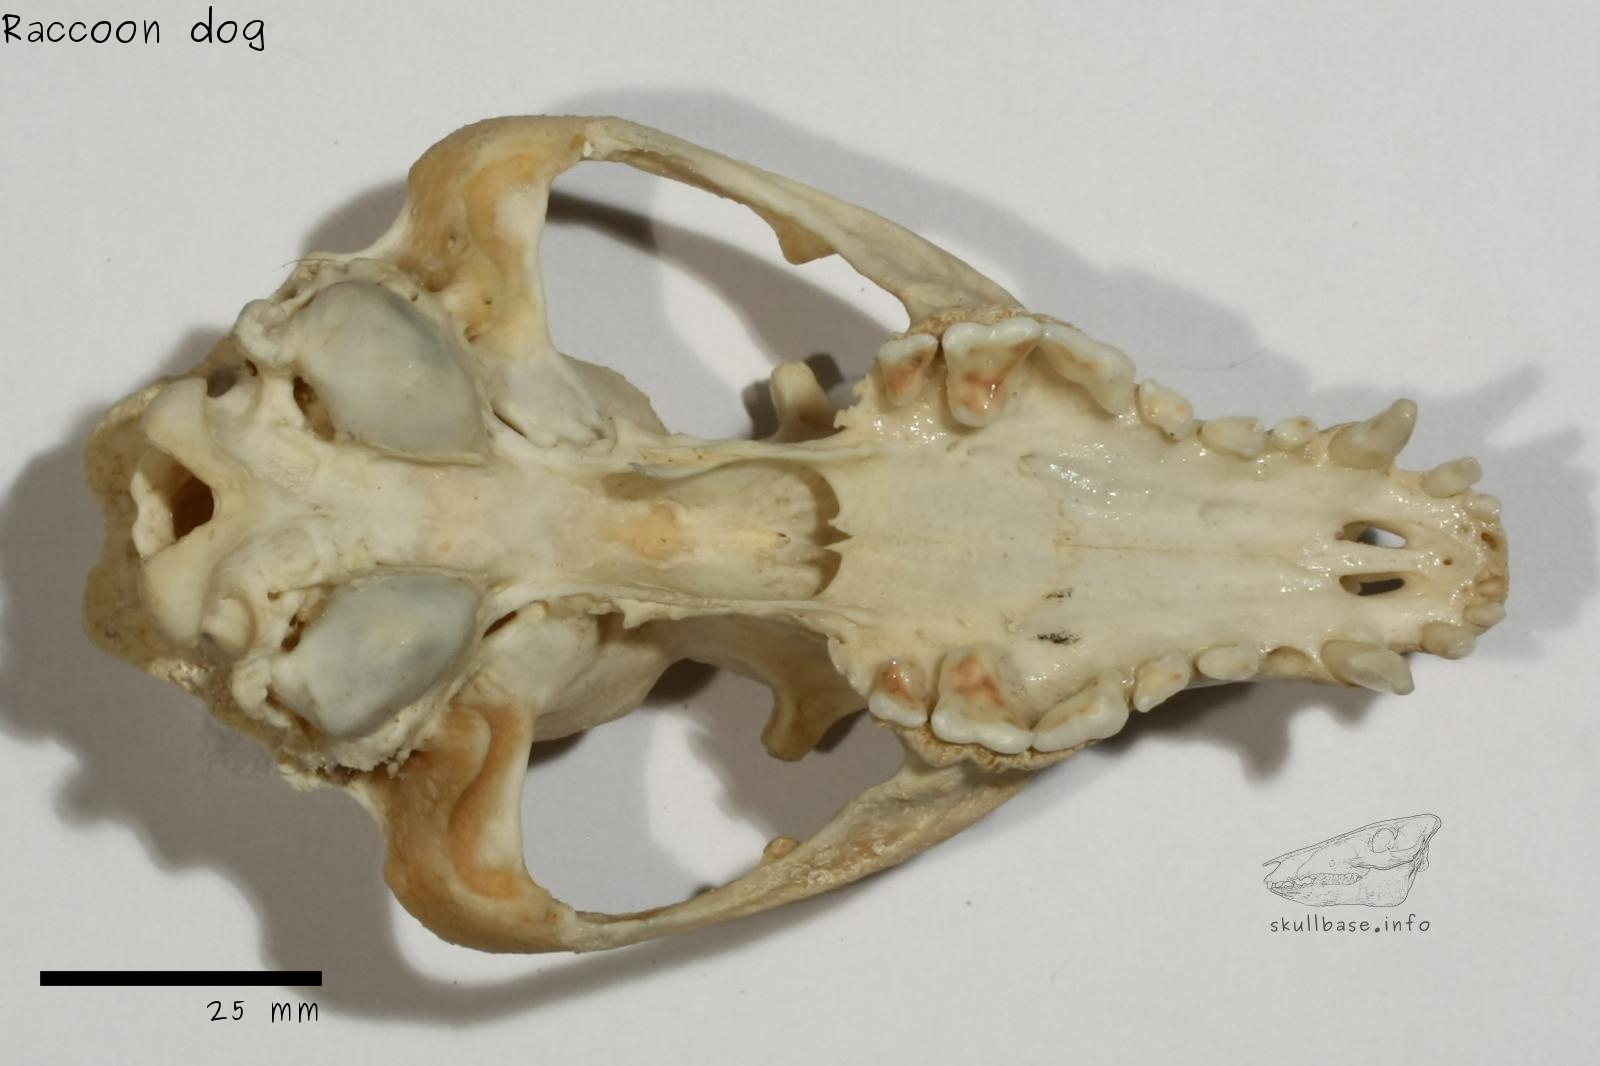 Raccoon dog (Nyctereutes procyonoides) skull ventral view